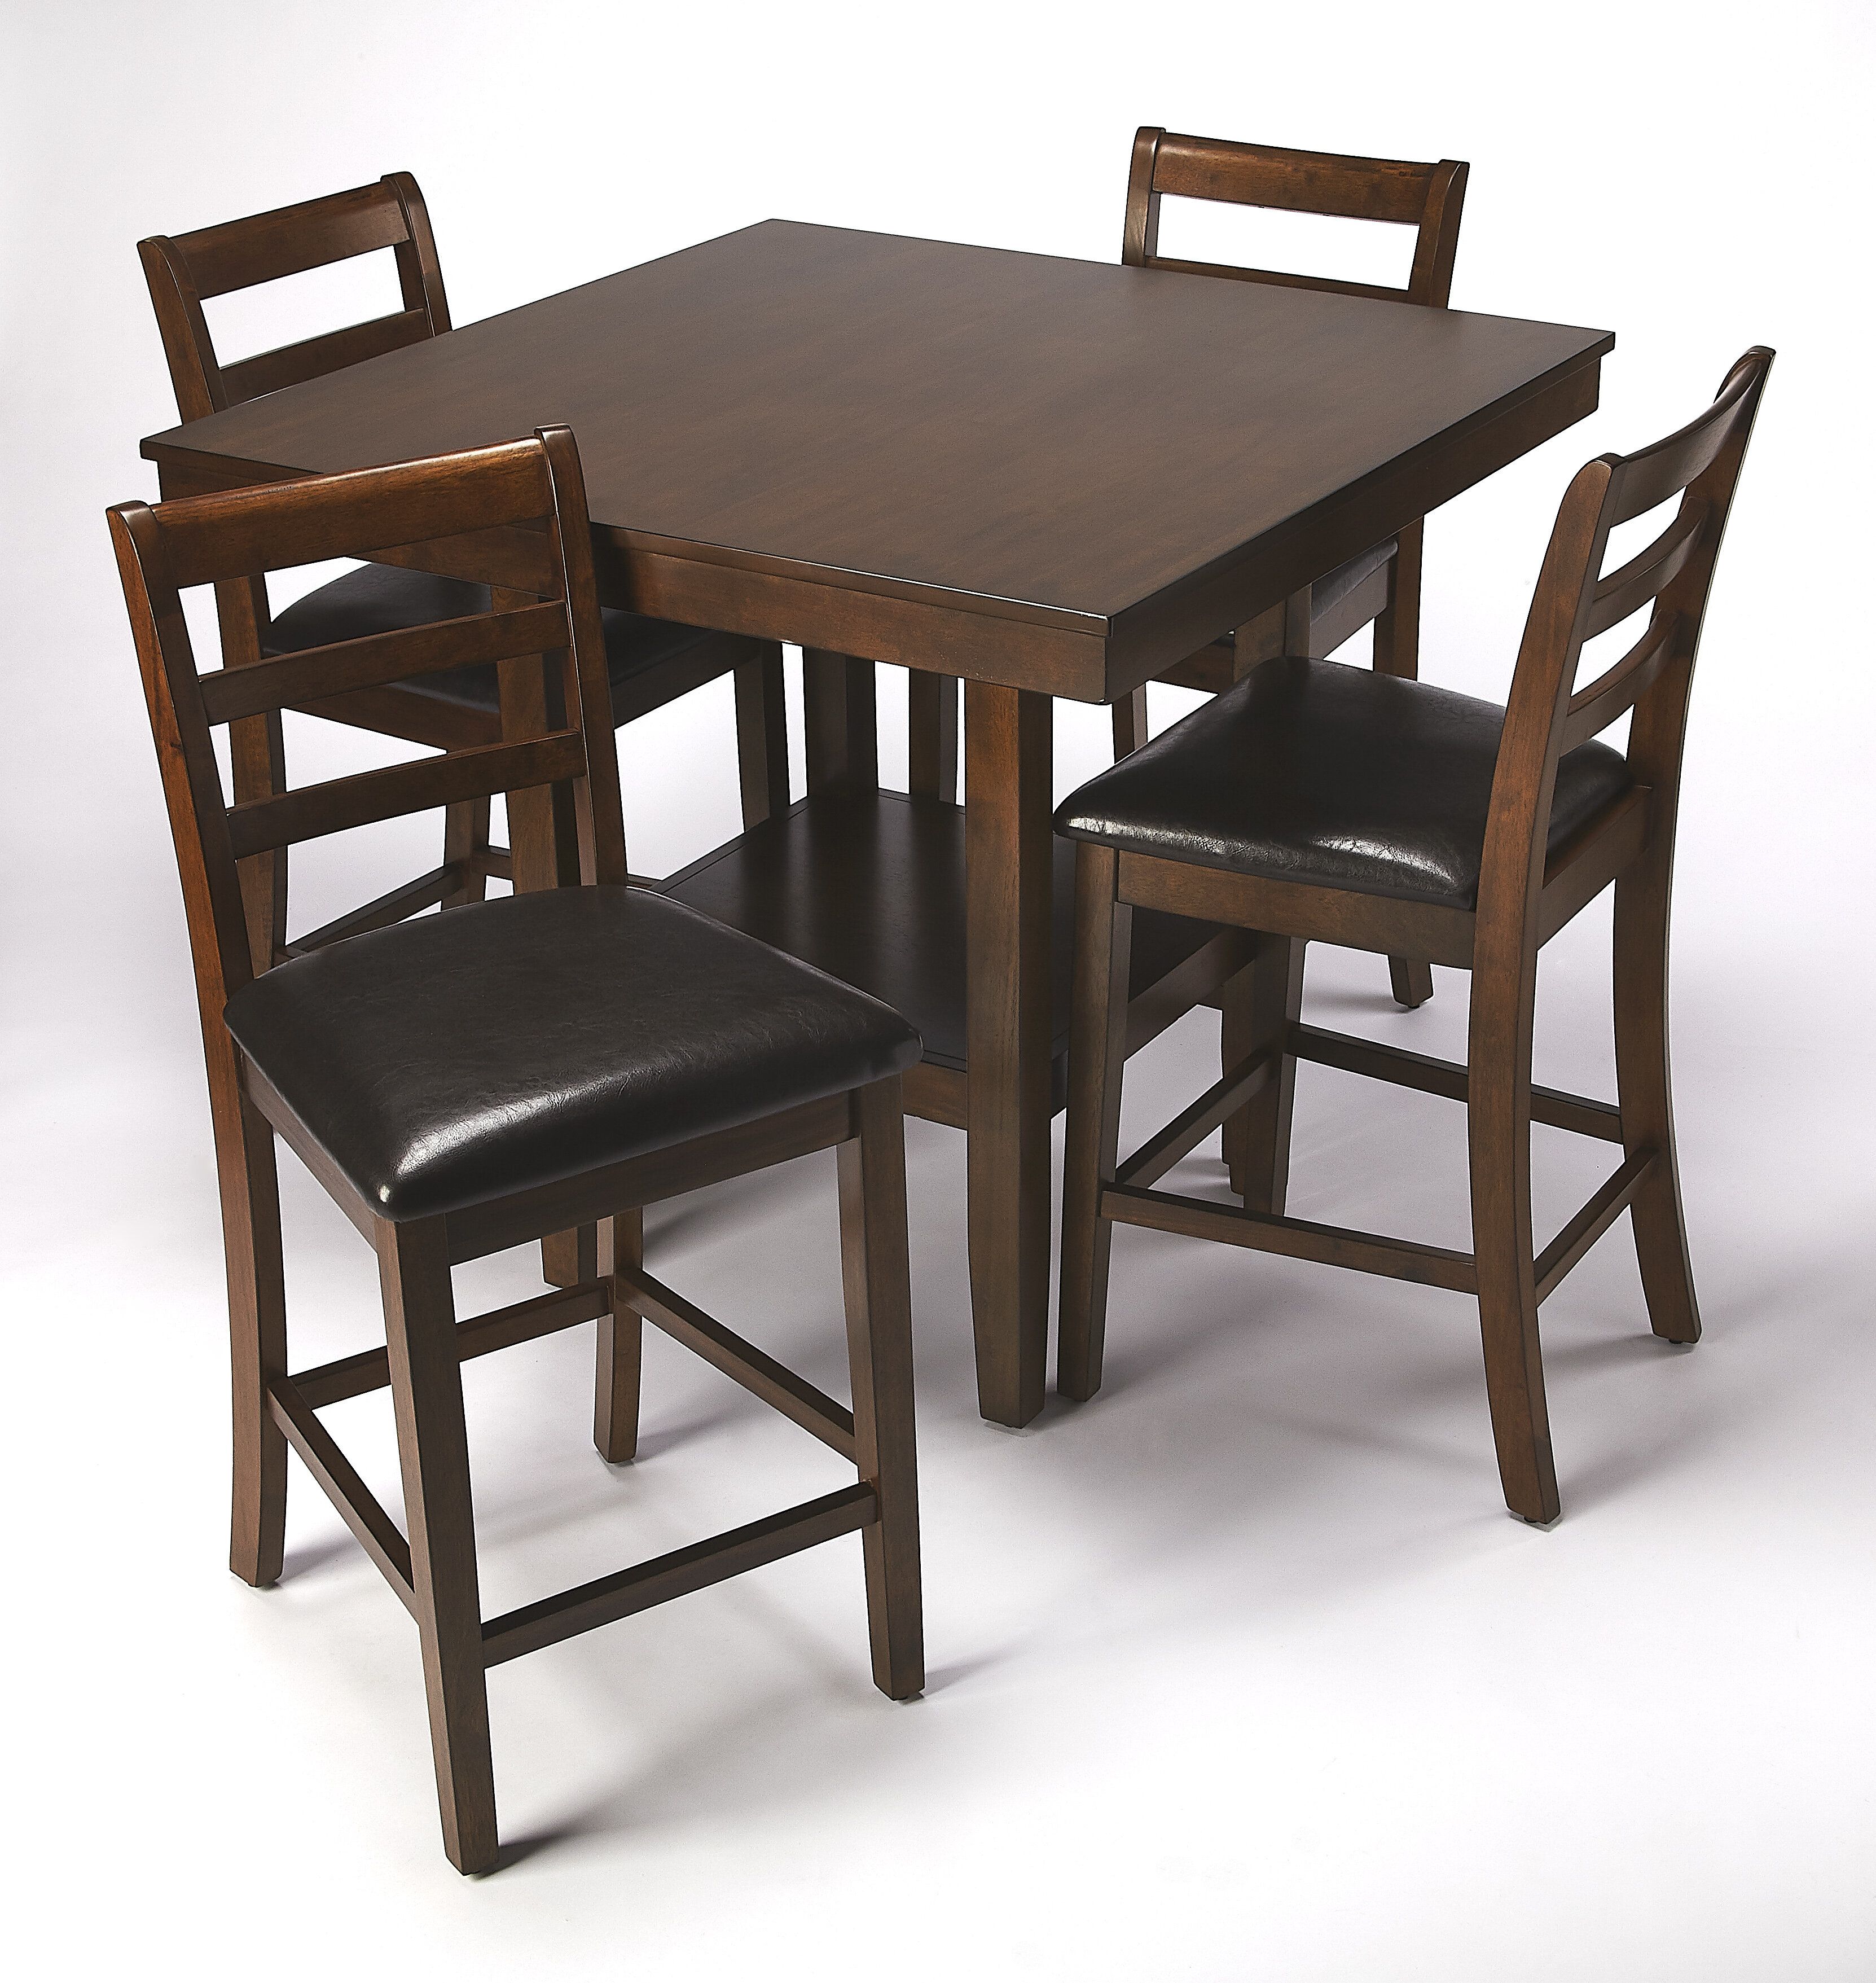 Sigler 5 Piece Dining Set With Recent Amir 5 Piece Solid Wood Dining Sets (Set Of 5) (View 2 of 20)